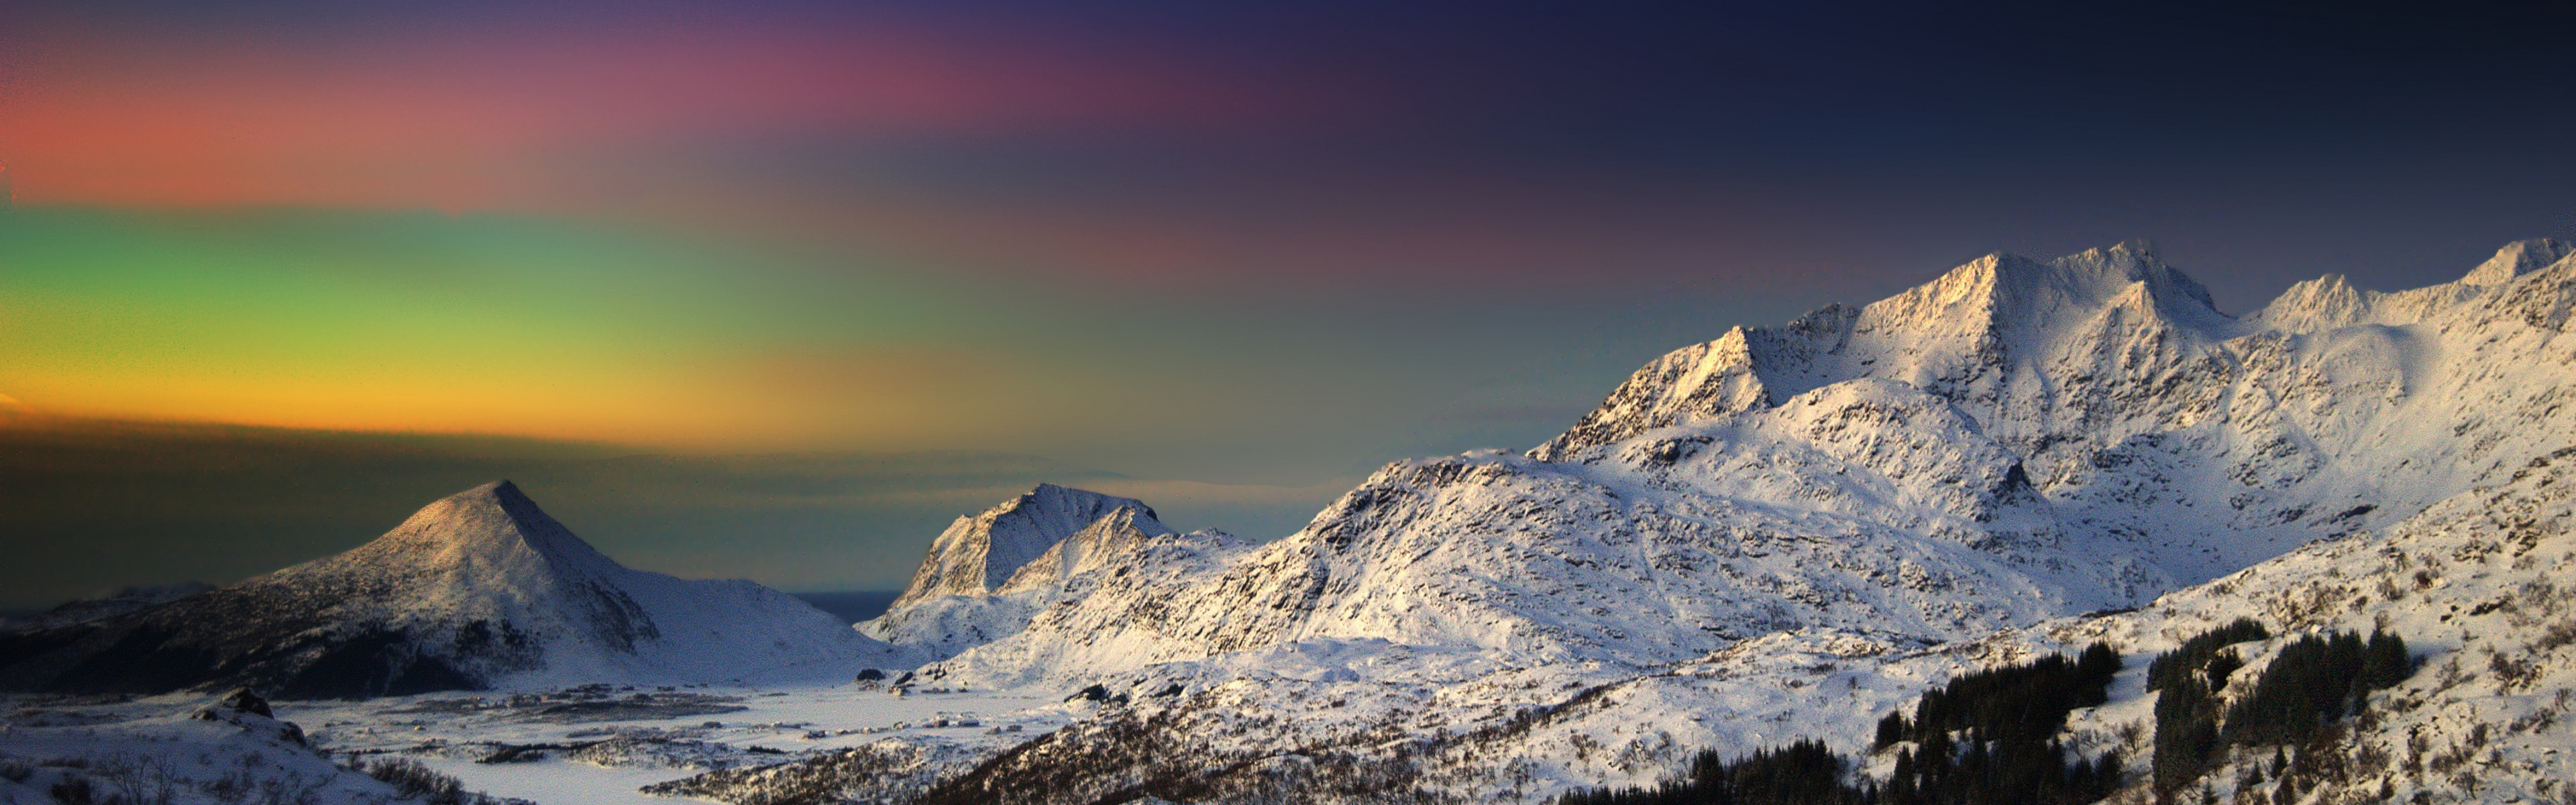 3840x1200 wallpaper.wiki-Winter-Morning-In-The-Mountains-Panoramic-